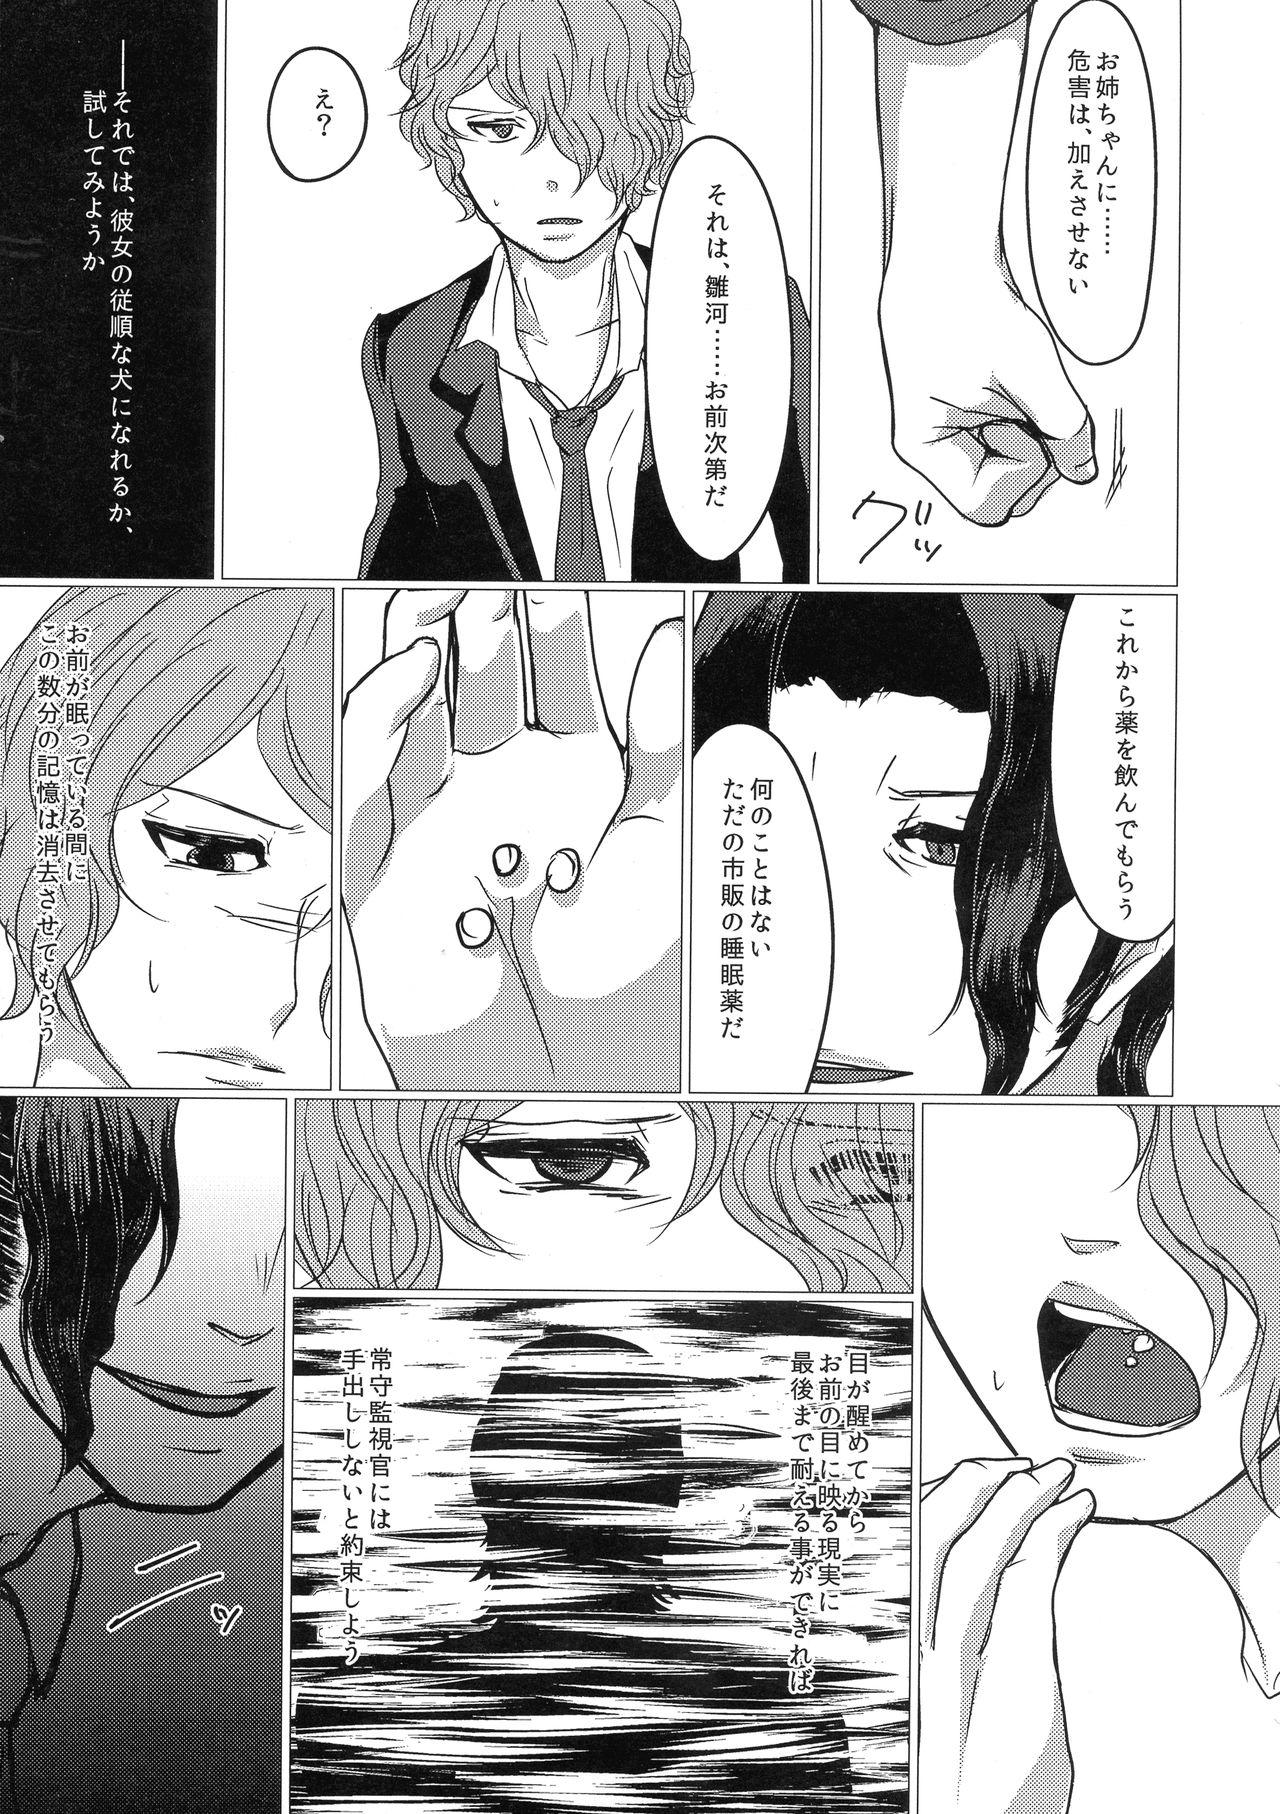 Funk I/O - Psycho-pass Amateur Teen - Page 11